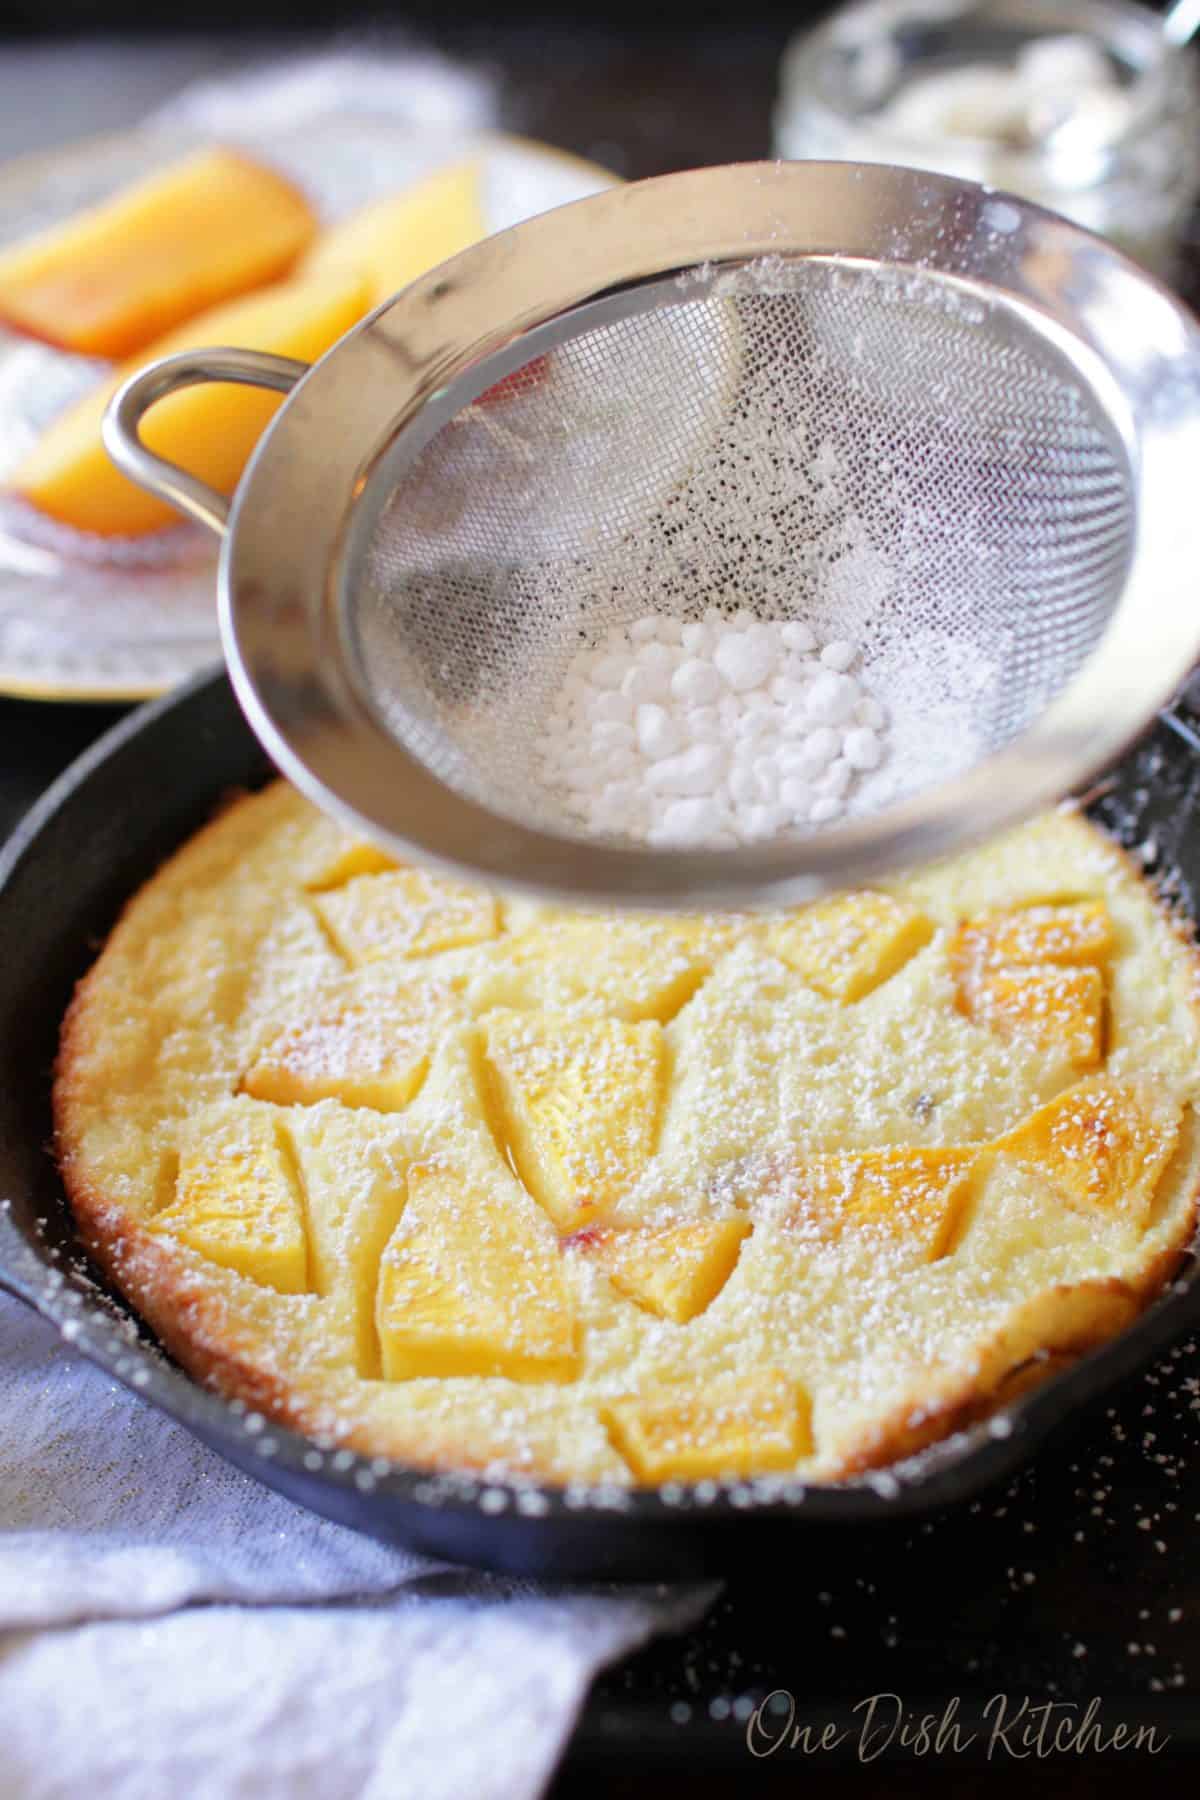 A peach filled puffed pancake in a small cast iron skillet being dusted with powdered sugar.